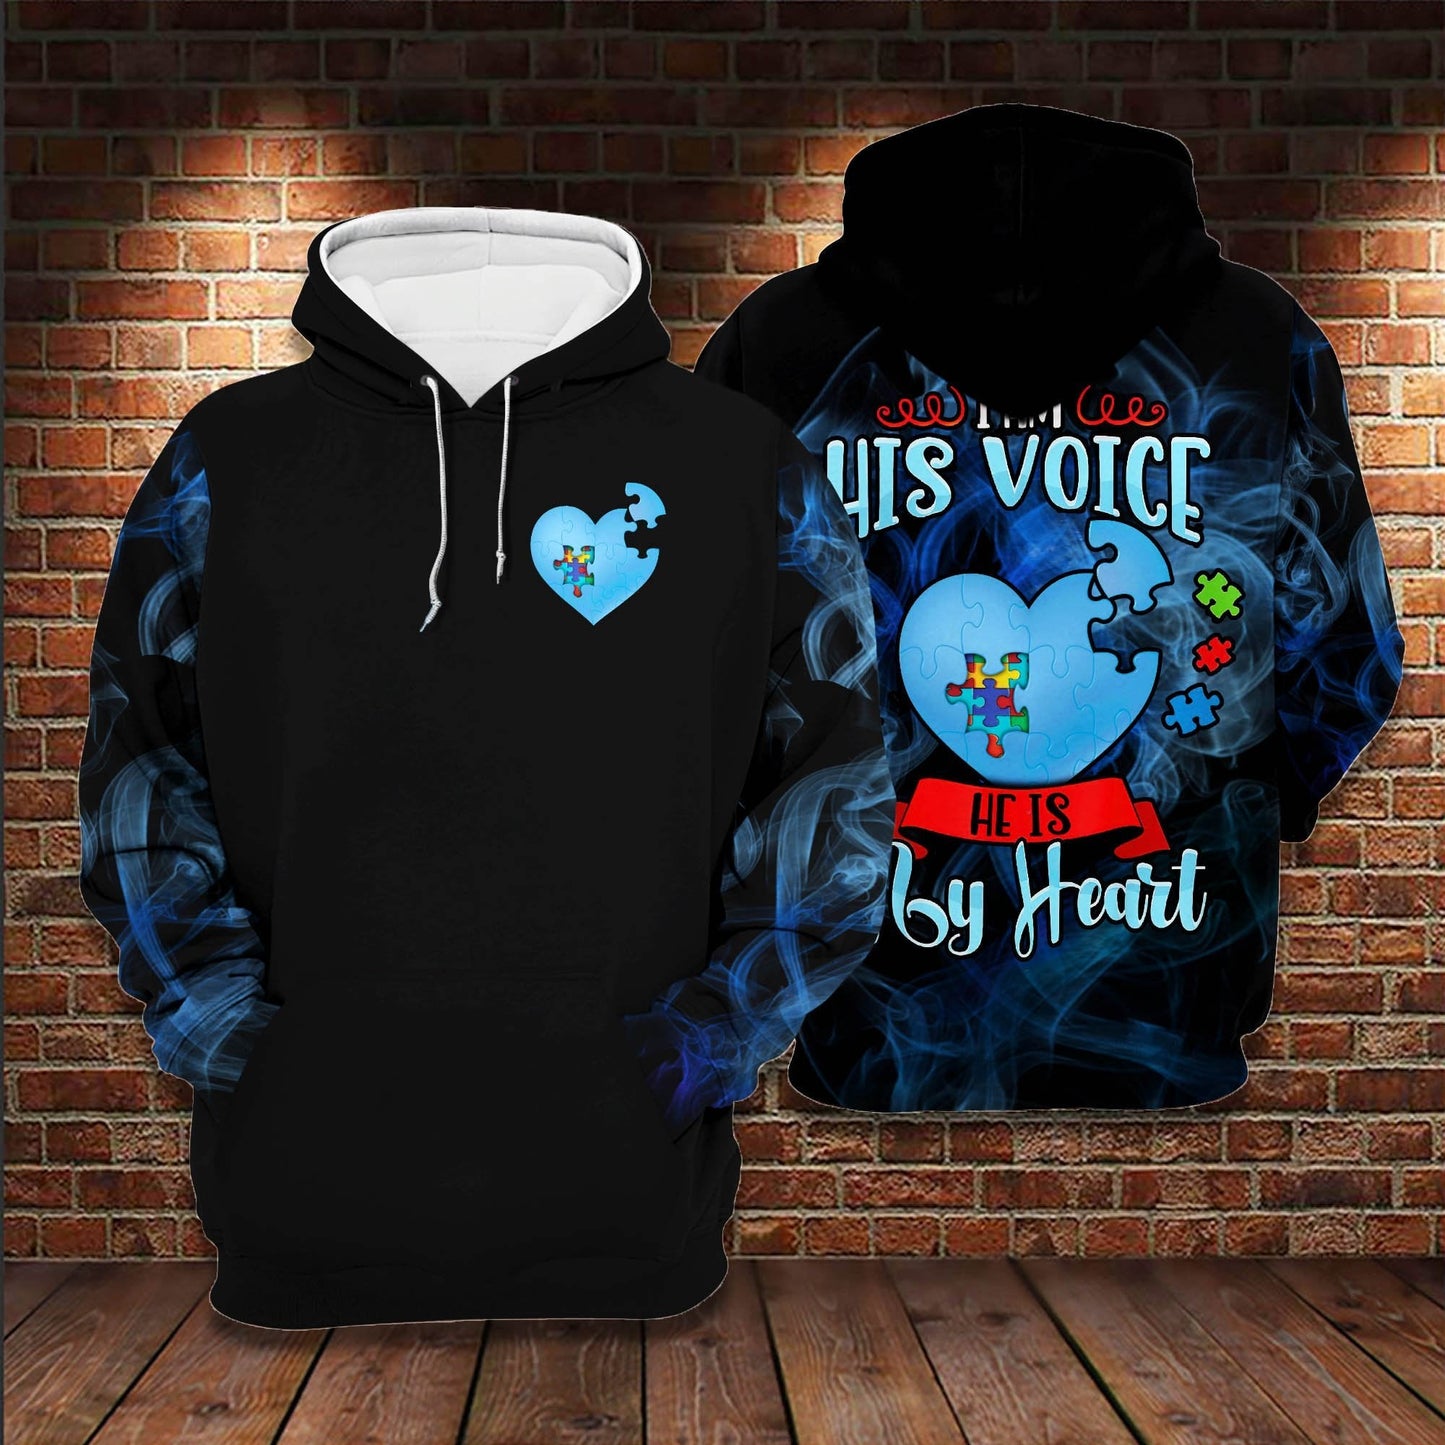 Unifinz Autism Hoodie I'm His Voice He Is My Heart Autism 3D Hoodie Autism Shirt Autism Apparel 2022